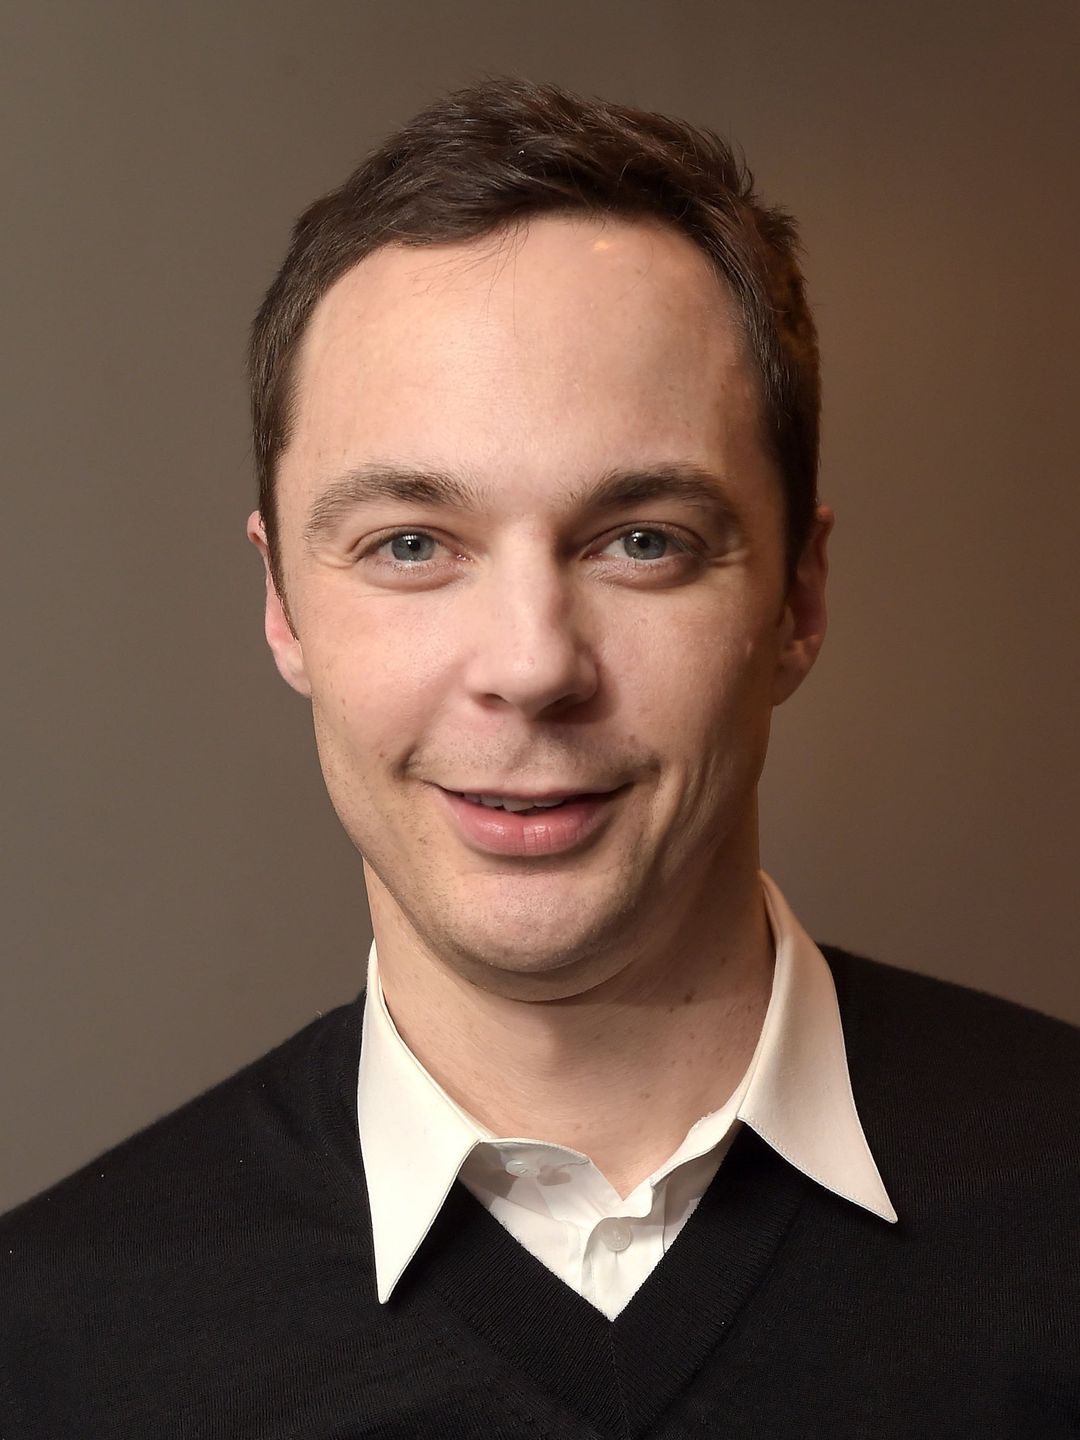 Jim Parsons where is he now